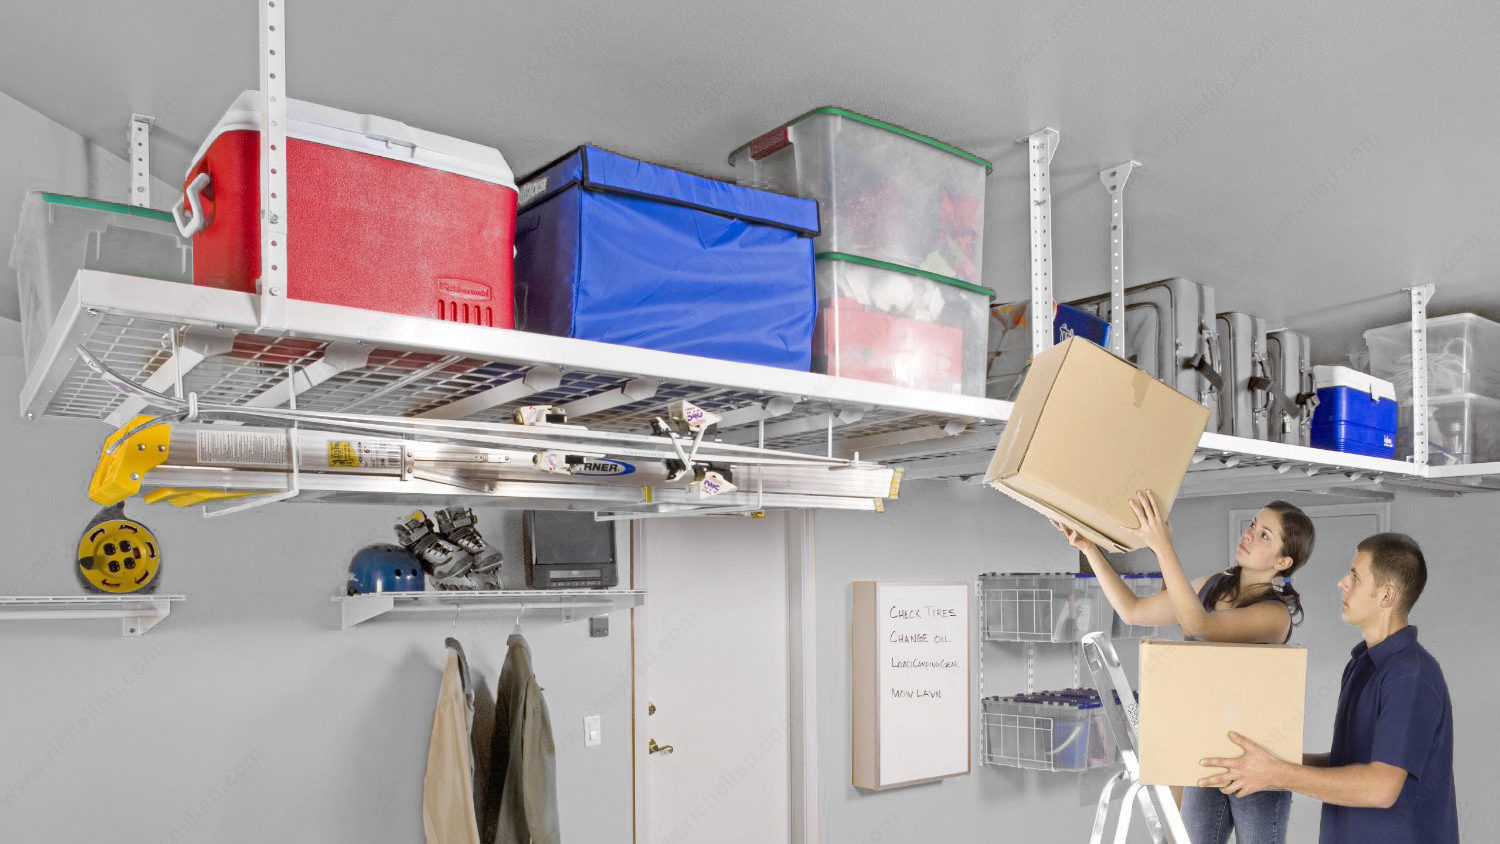 Garage storage solutions that help you maximize space and much more -  Richelieu Hardware